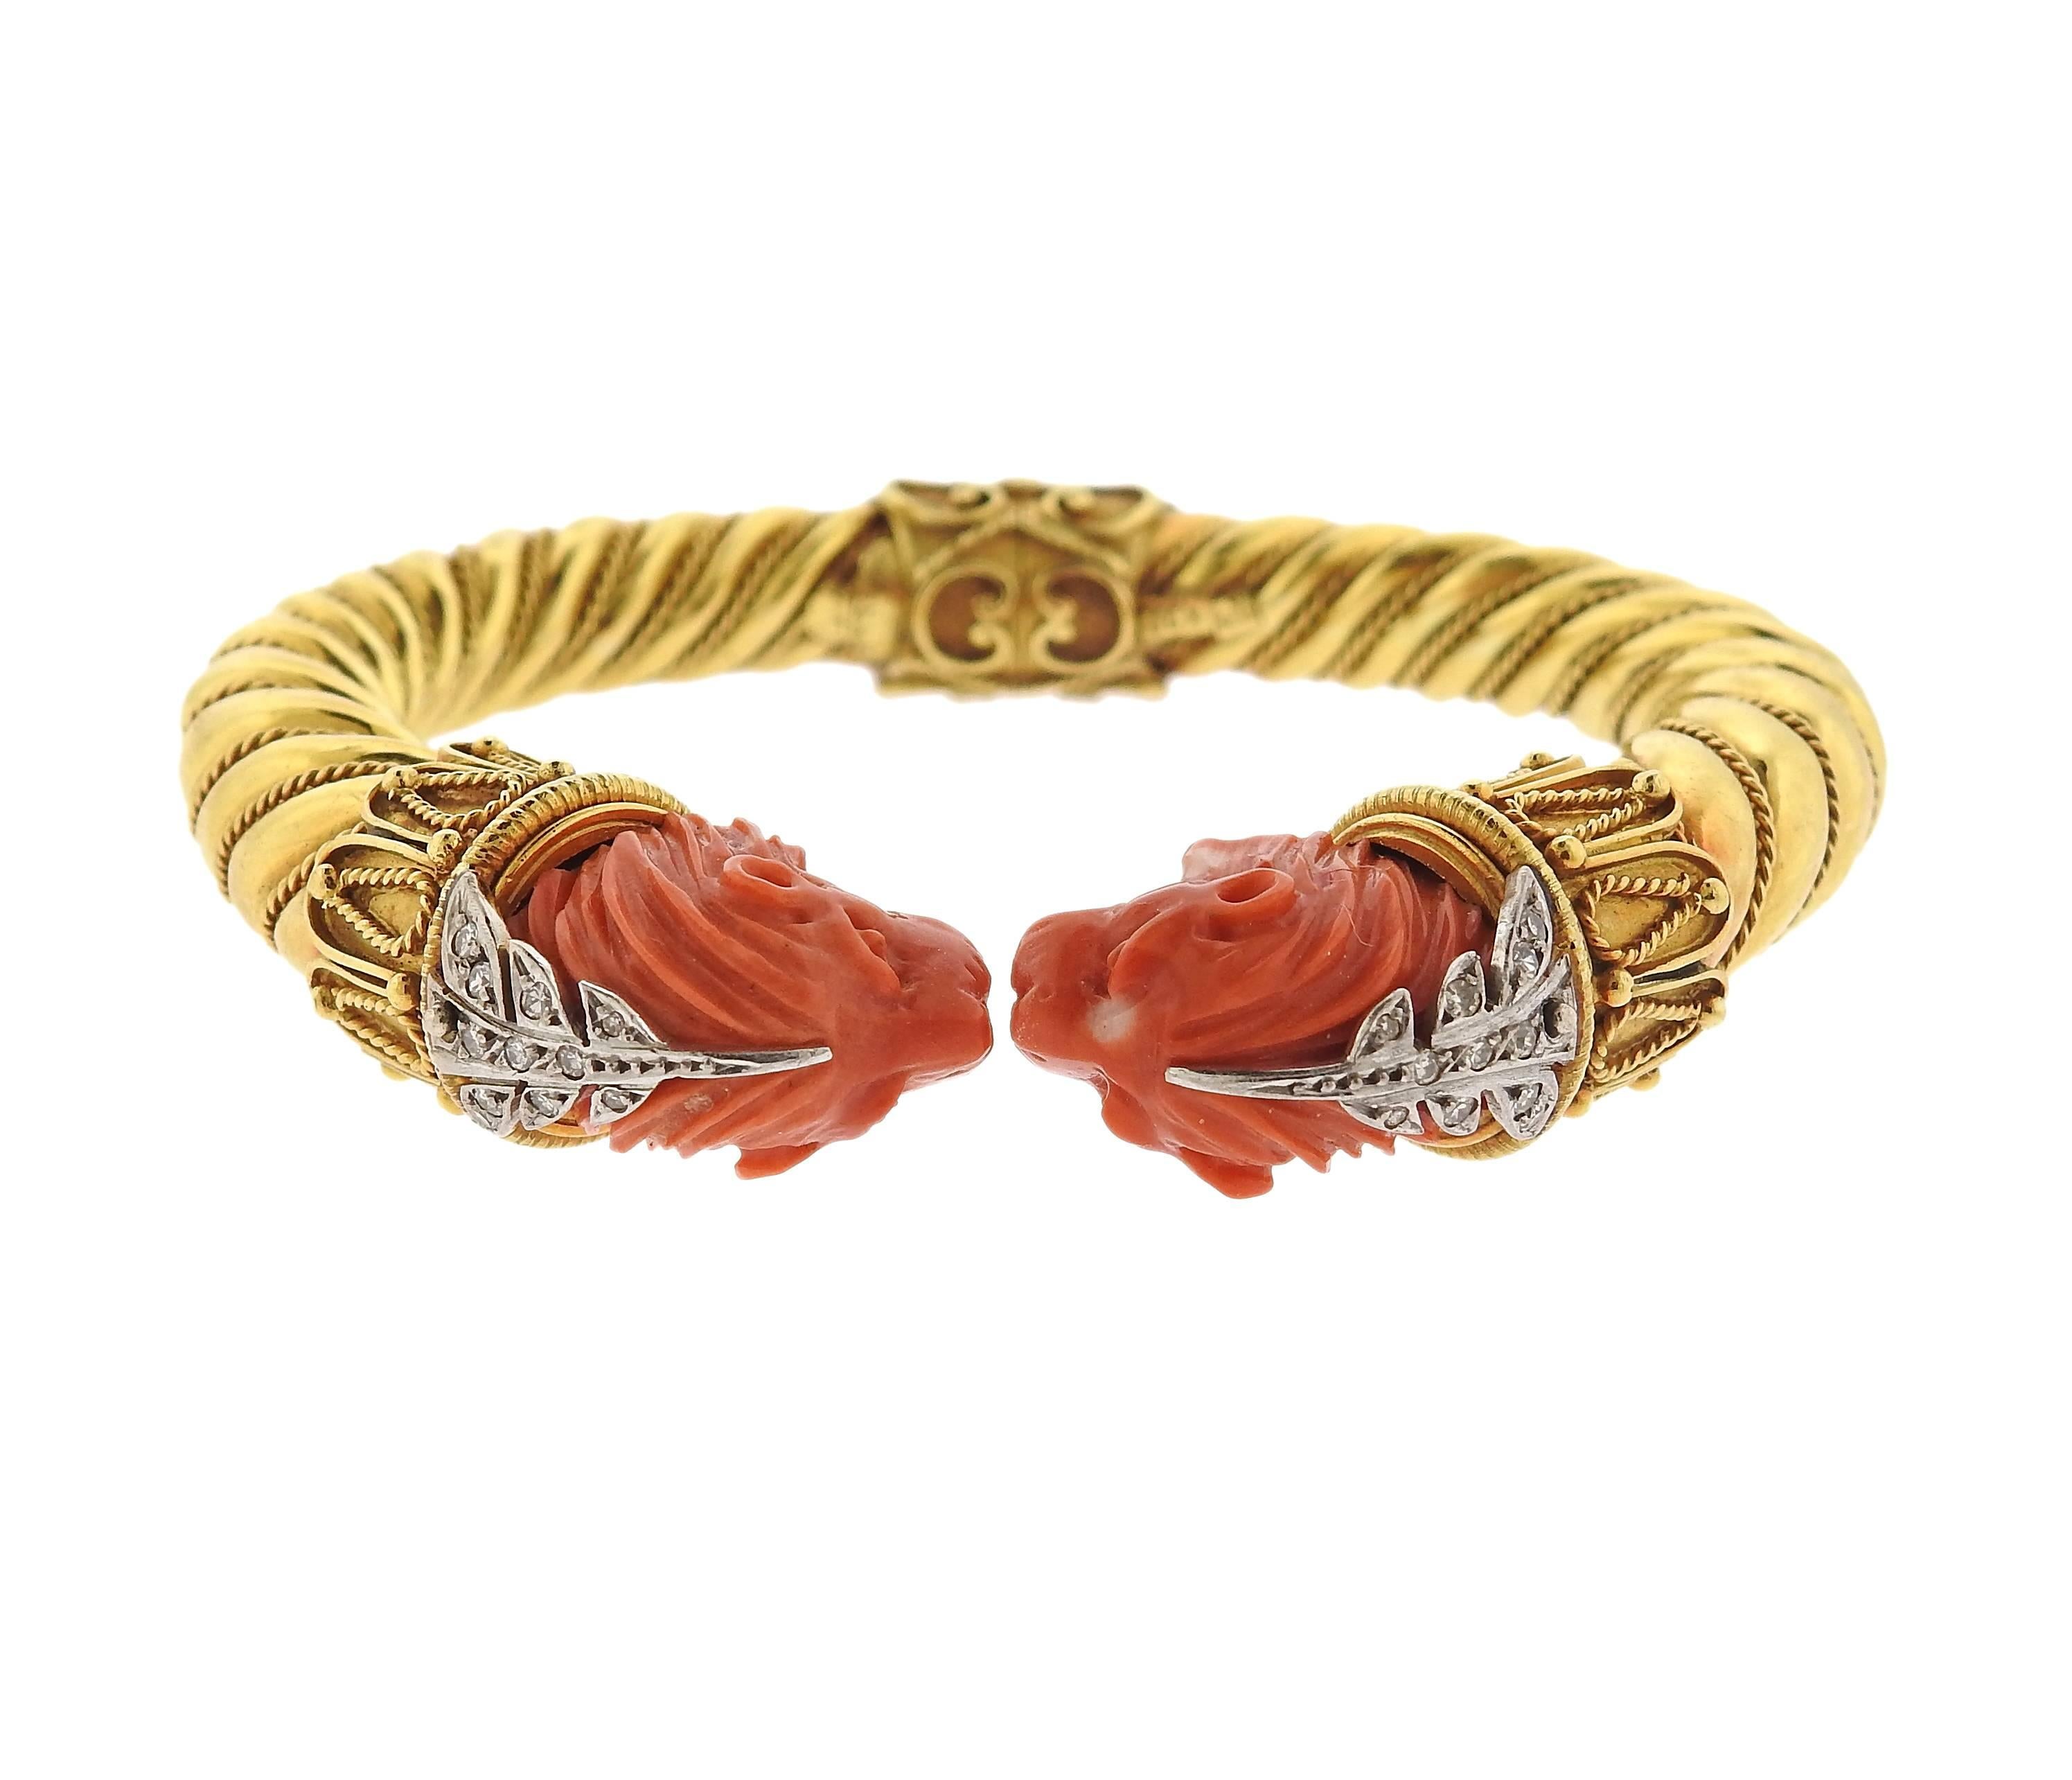 Greek 22k gold bangle bracelet, featuring  lion heads, set in carved coral, decorated with approximately 0.20ctw in diamonds. Bracelet will fit an approximately 7" wrist, each  lion head measures 14mm x 20mm. Marked: Greece, k22, GIT.  Weight